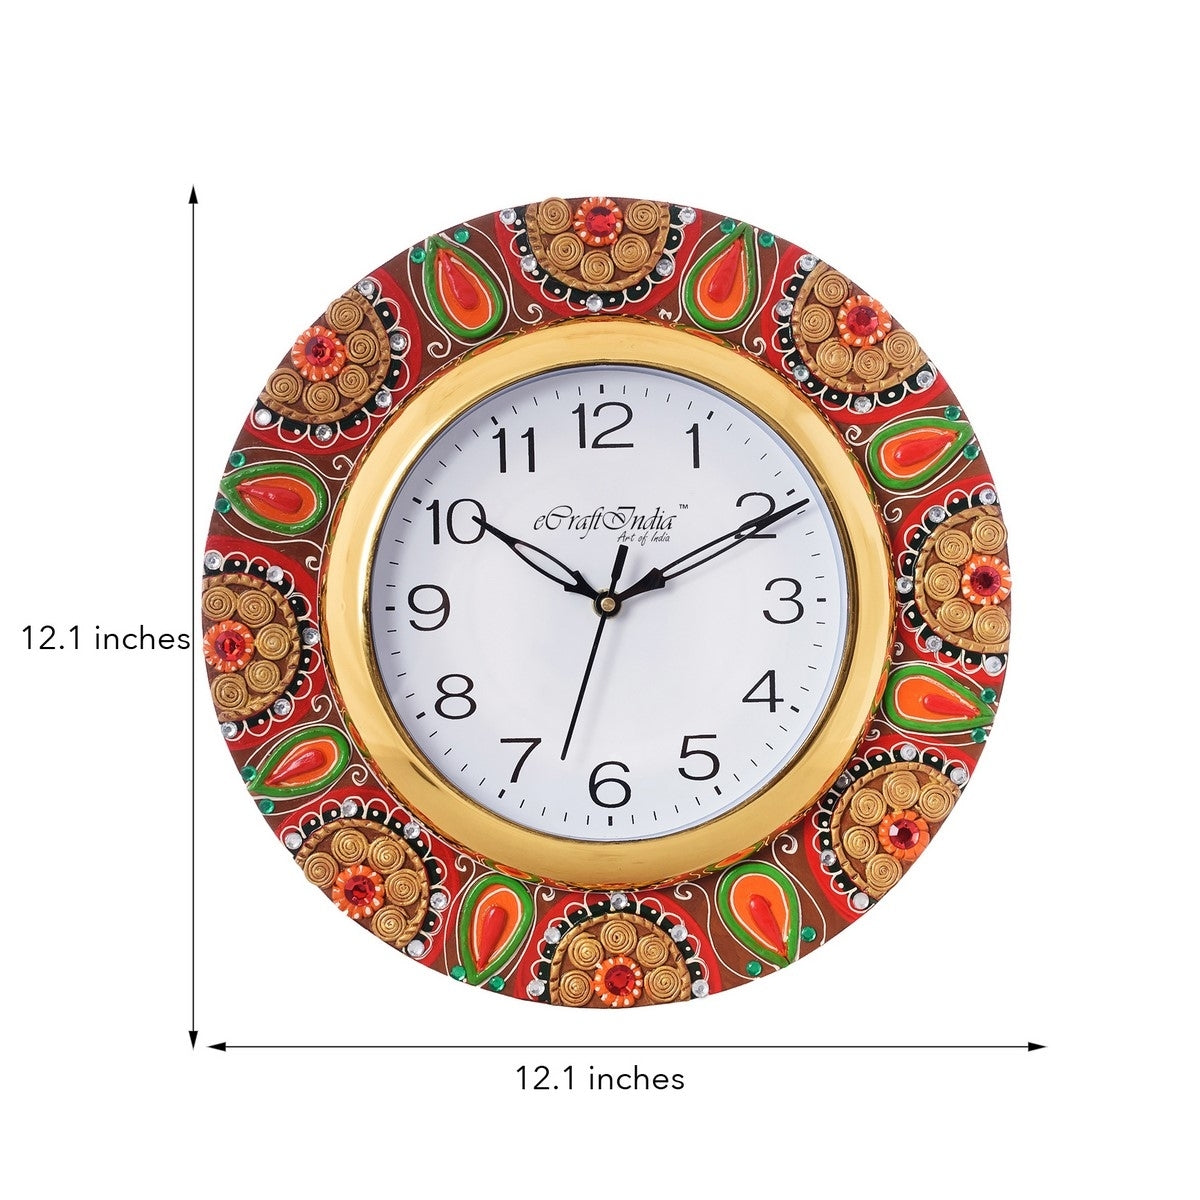 Crystal Studded Embellish Papier-Mache Wooden Handcrafted Wall Clock 5